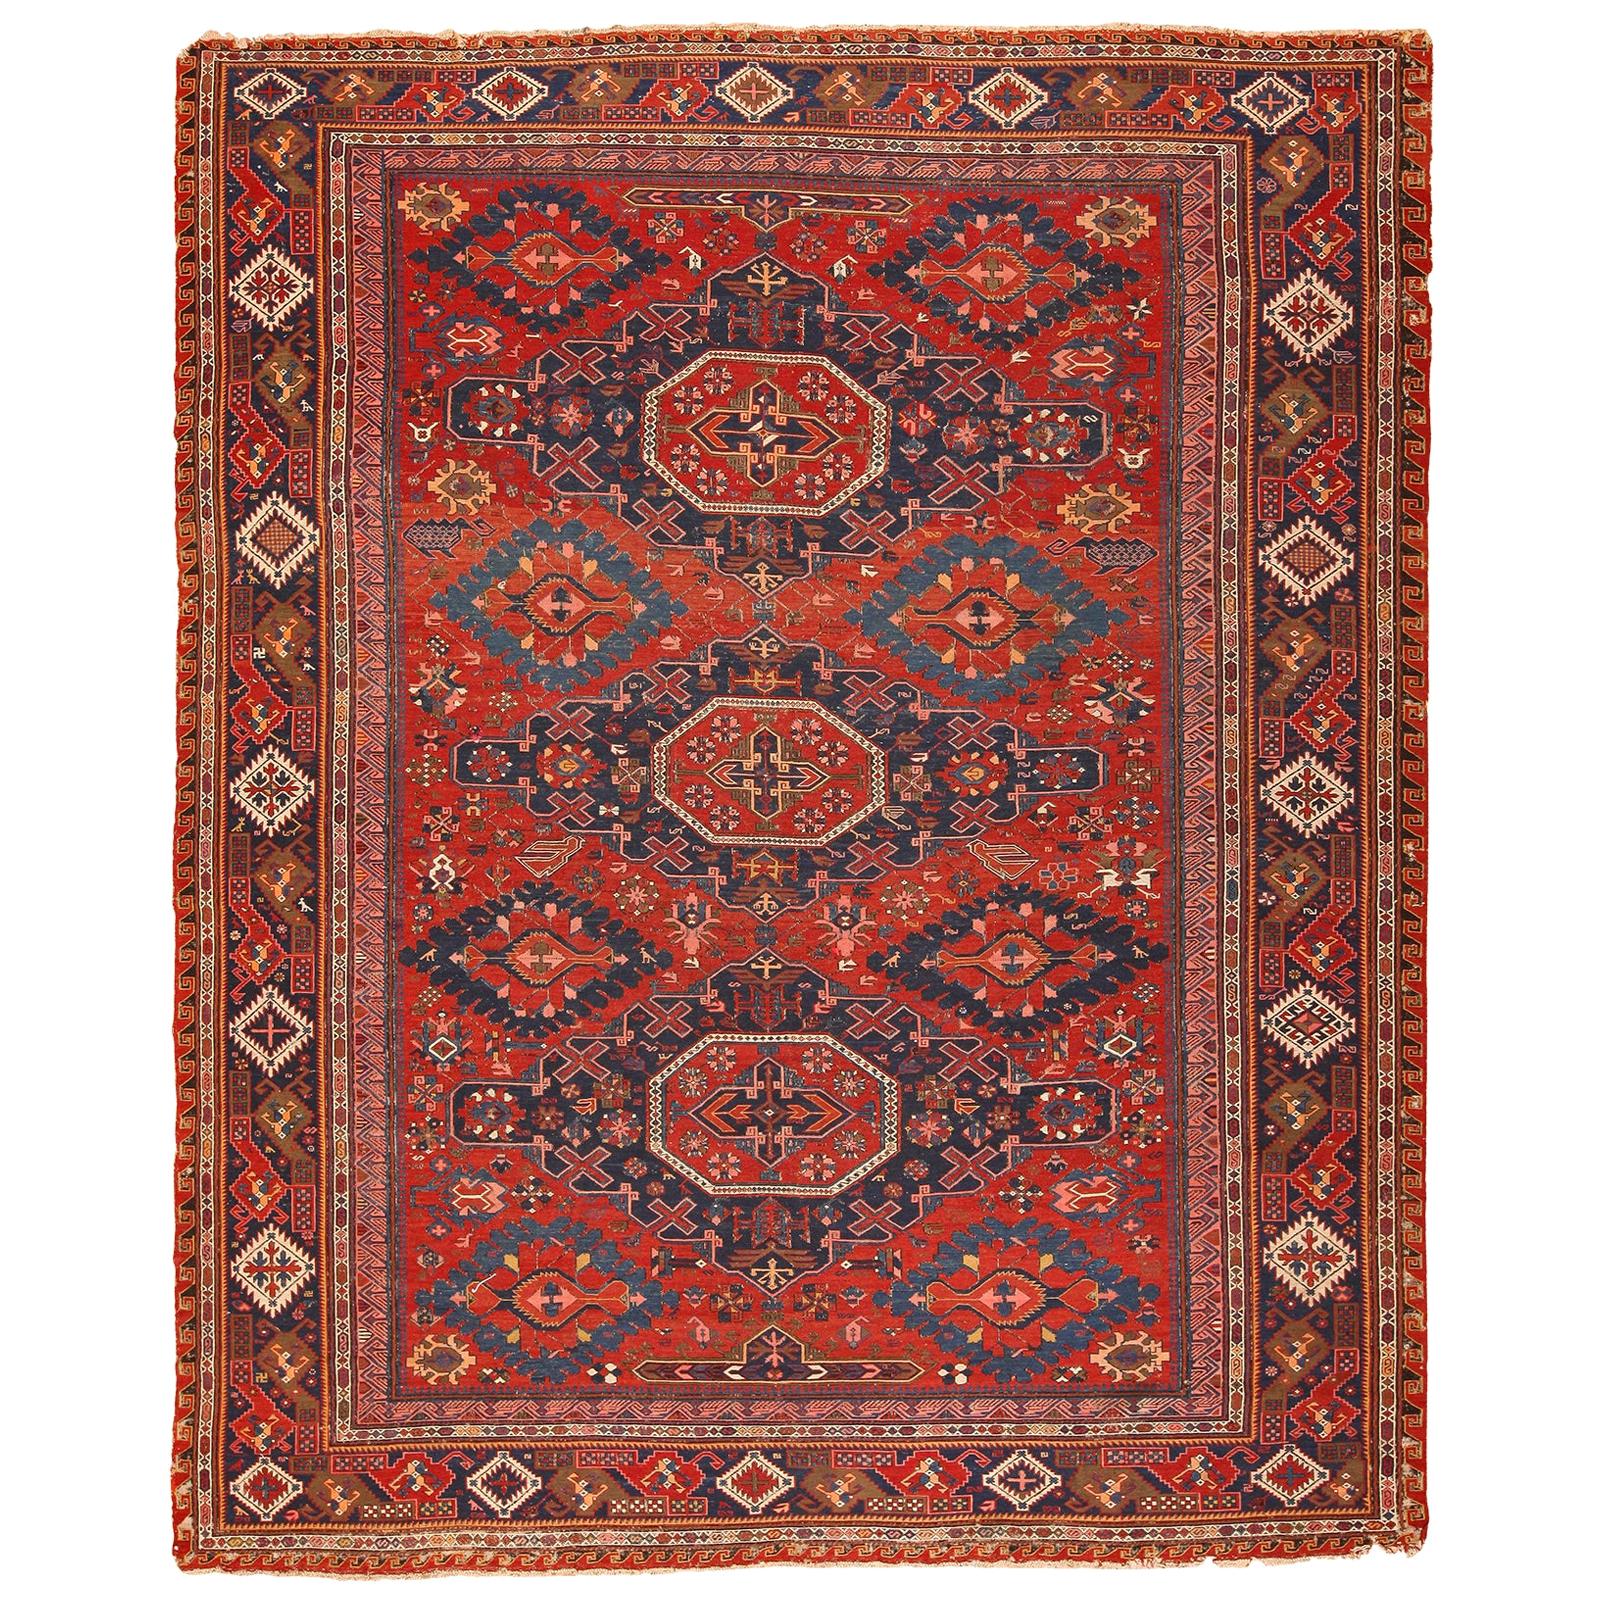 Nazmiyal Collection Antique Caucasian Soumak Rug. Size: 9 ft 2 in x 11 ft 4 in